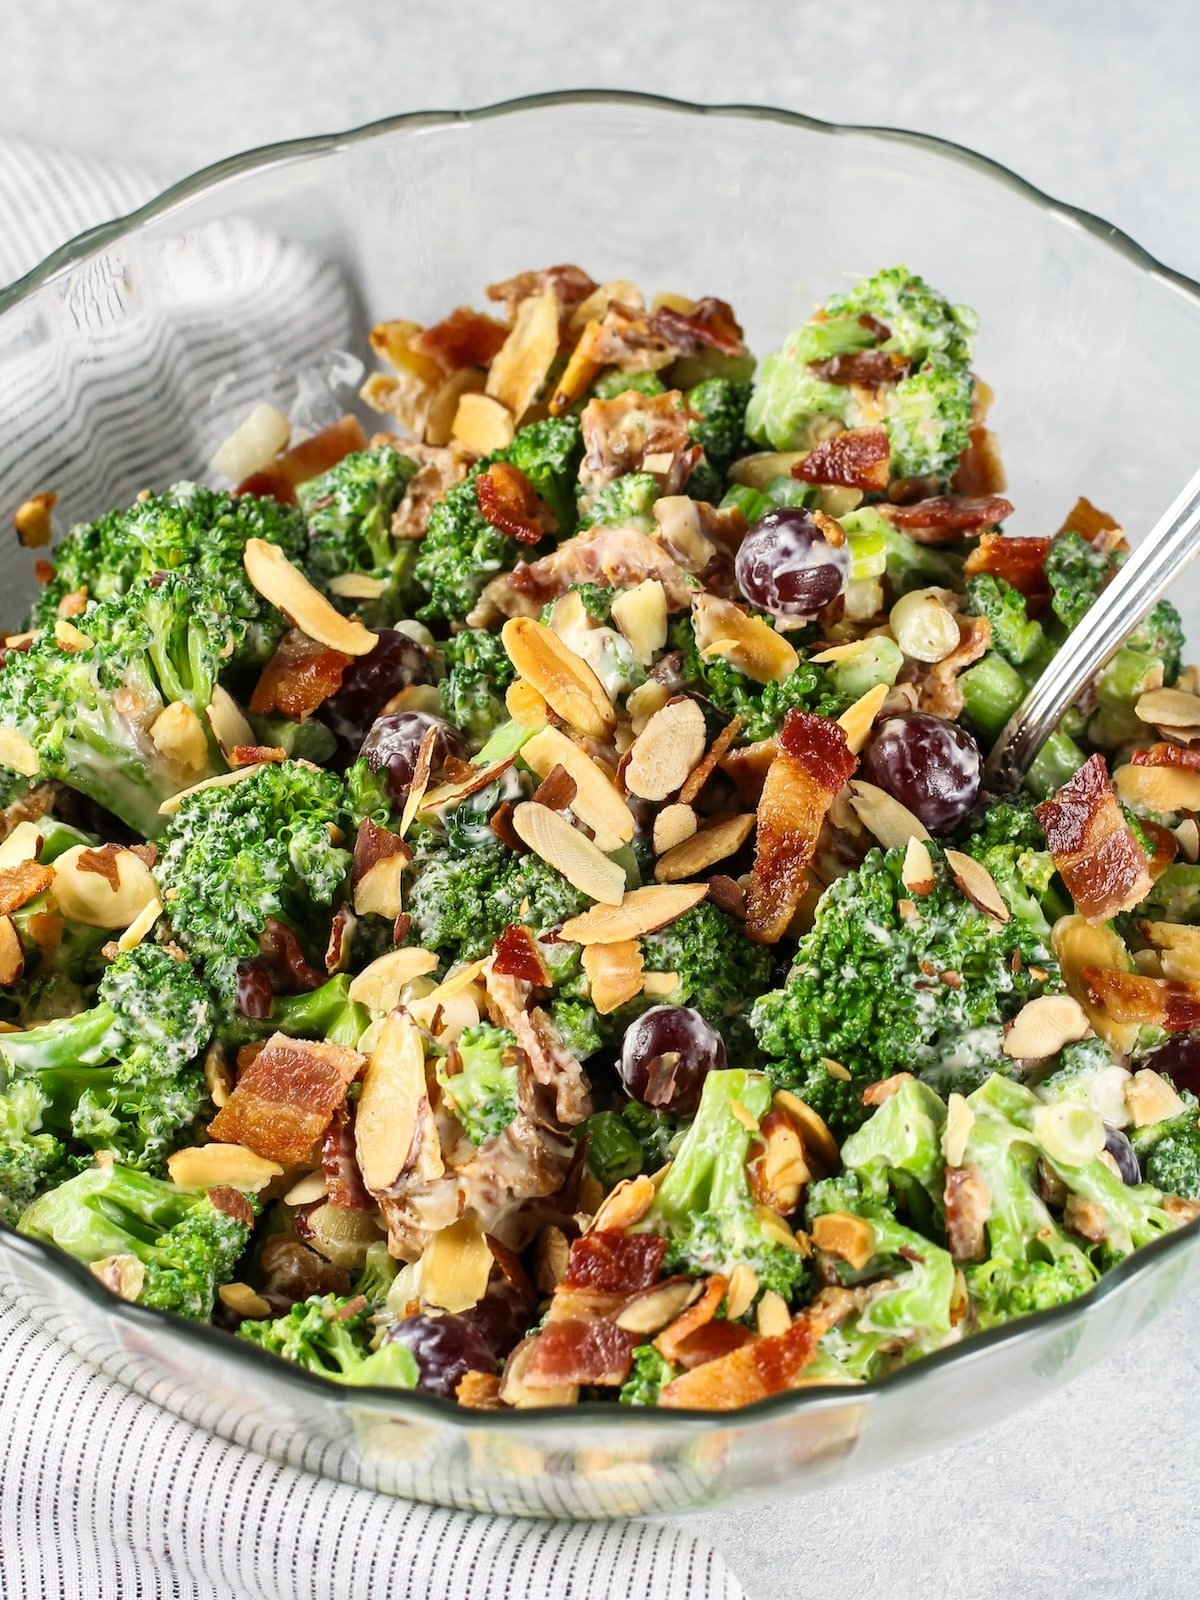 Broccoli salad with grapes and bacon in a glass bowl with a spoon.